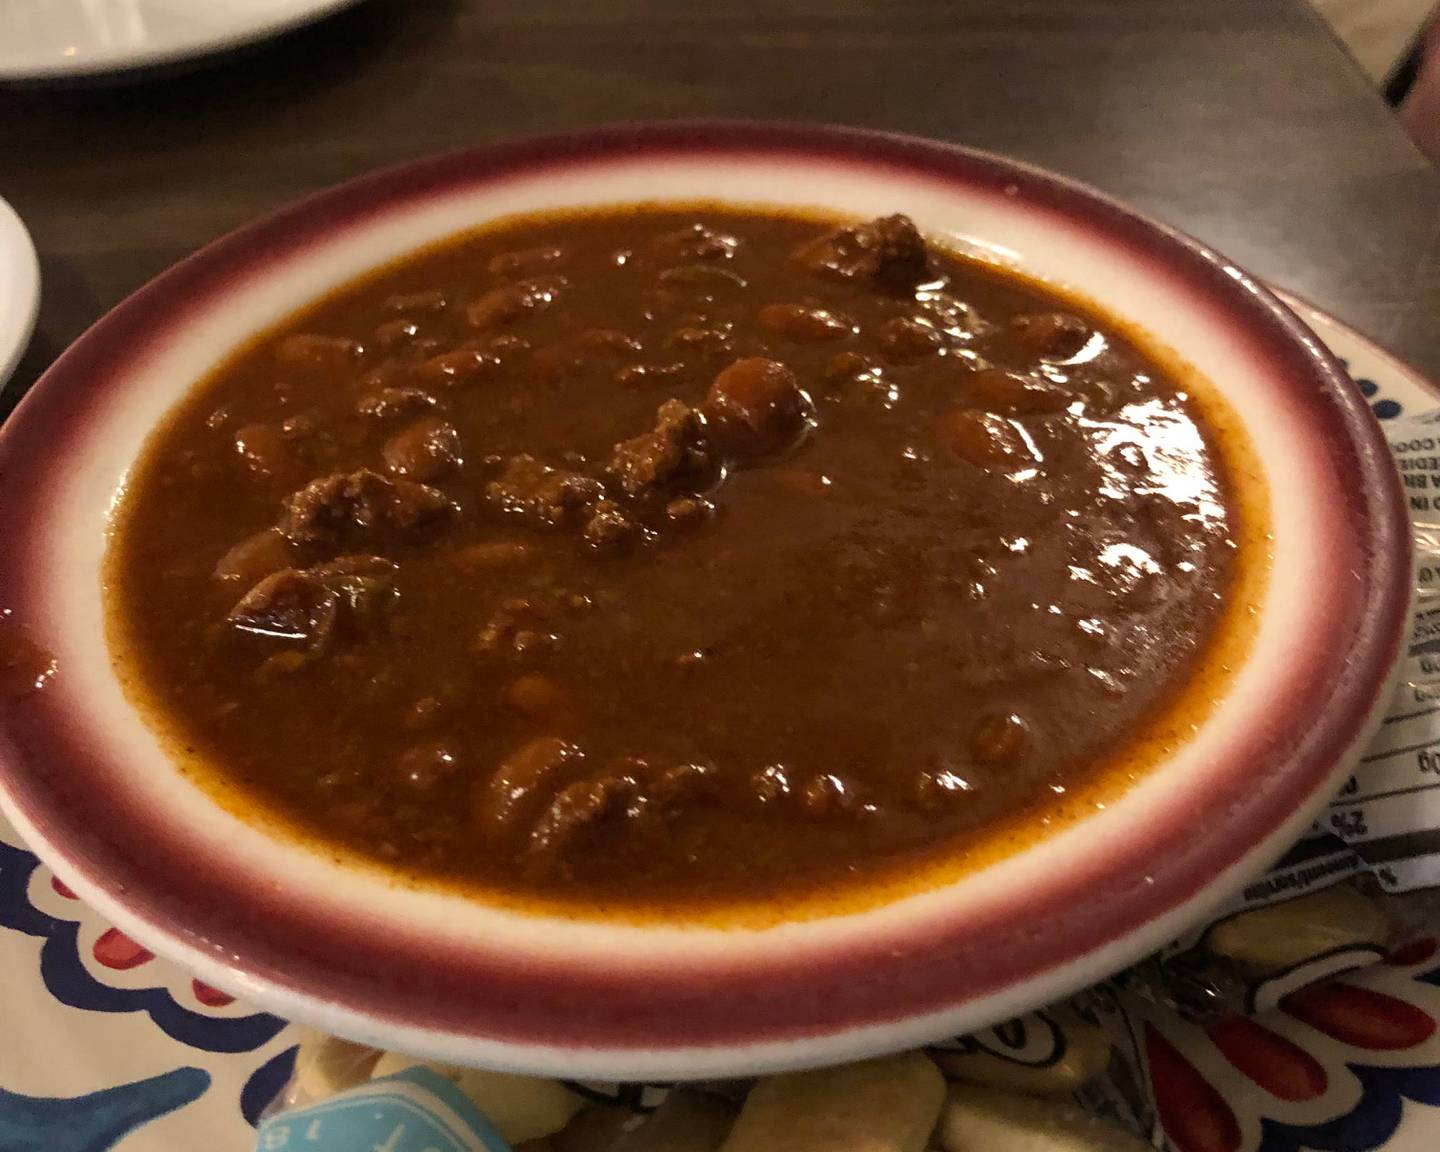 An image of the chili at Joy and Ed's in Utica.